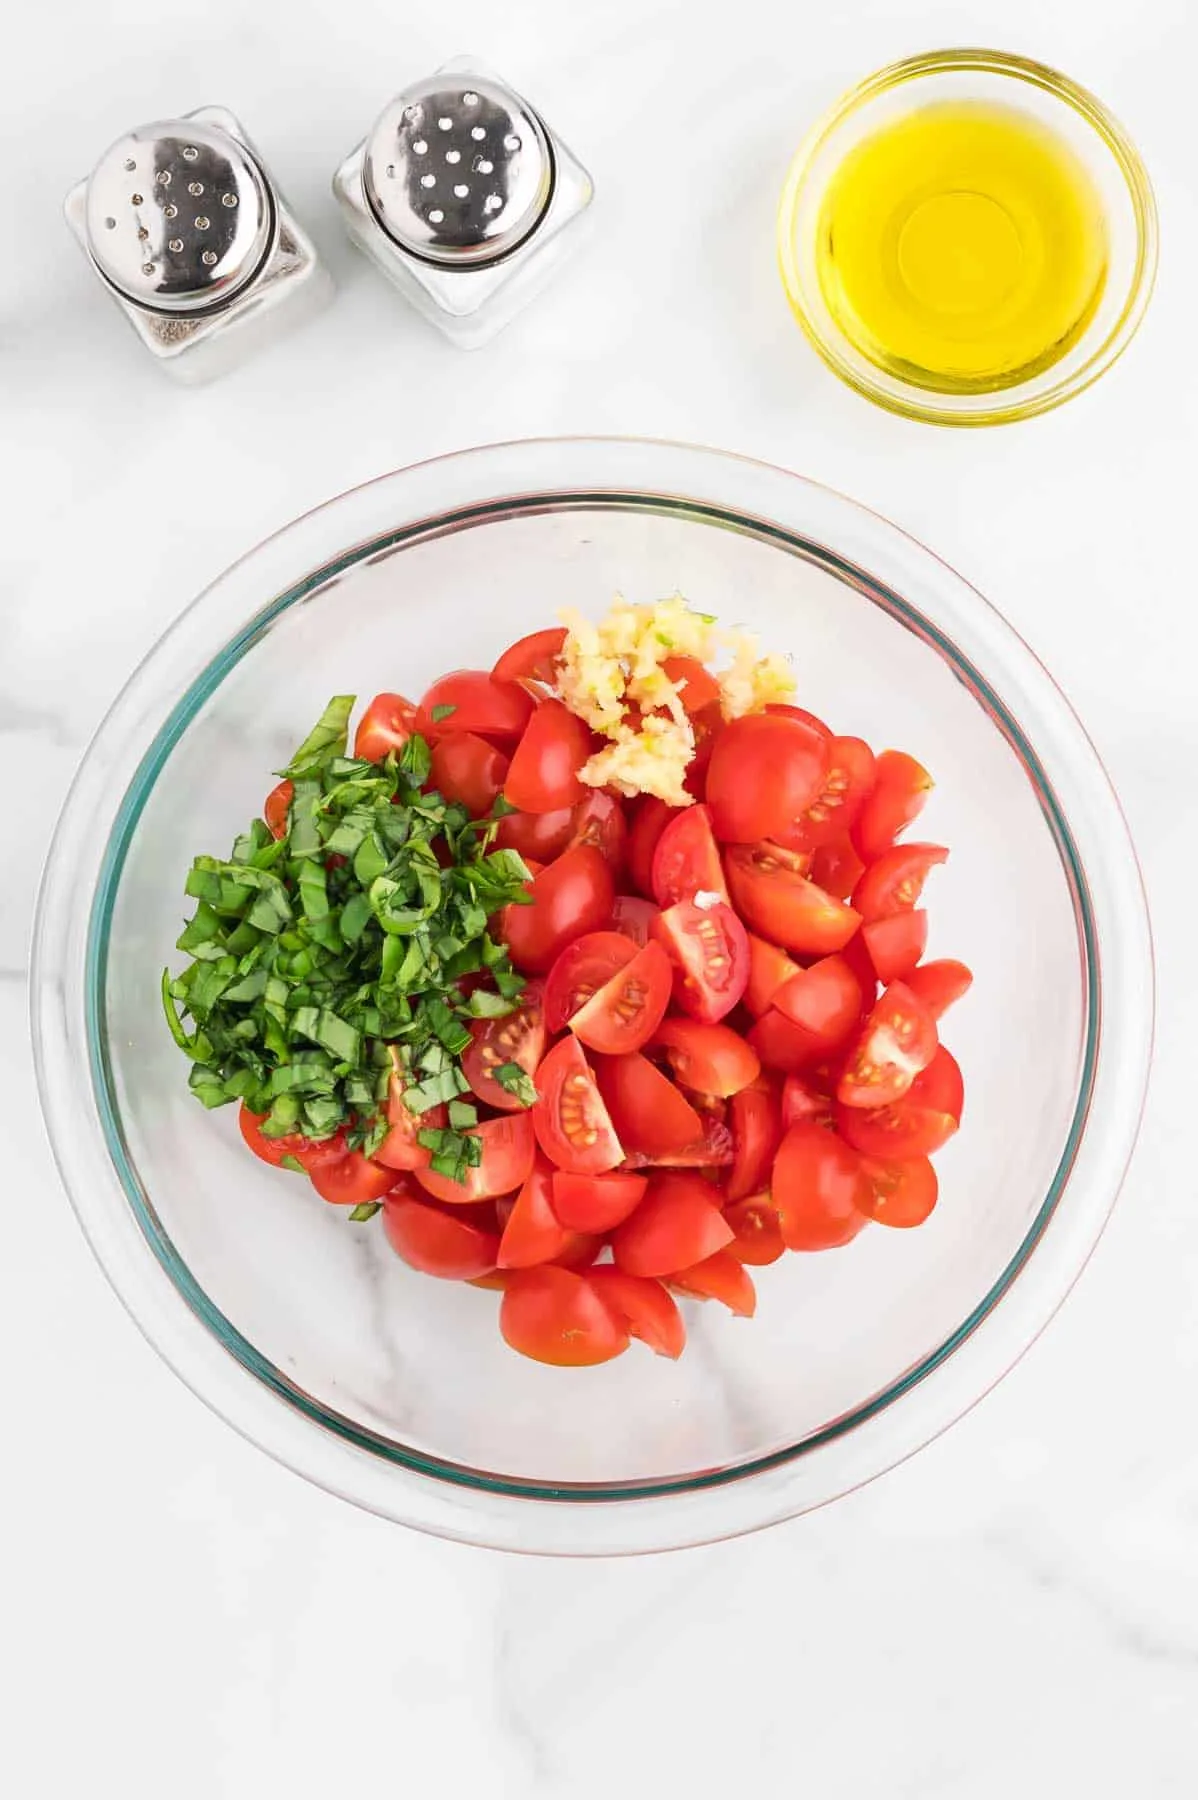 chopped basil leaves, minced garlic and quartered cherry tomatoes in a mixing bowl